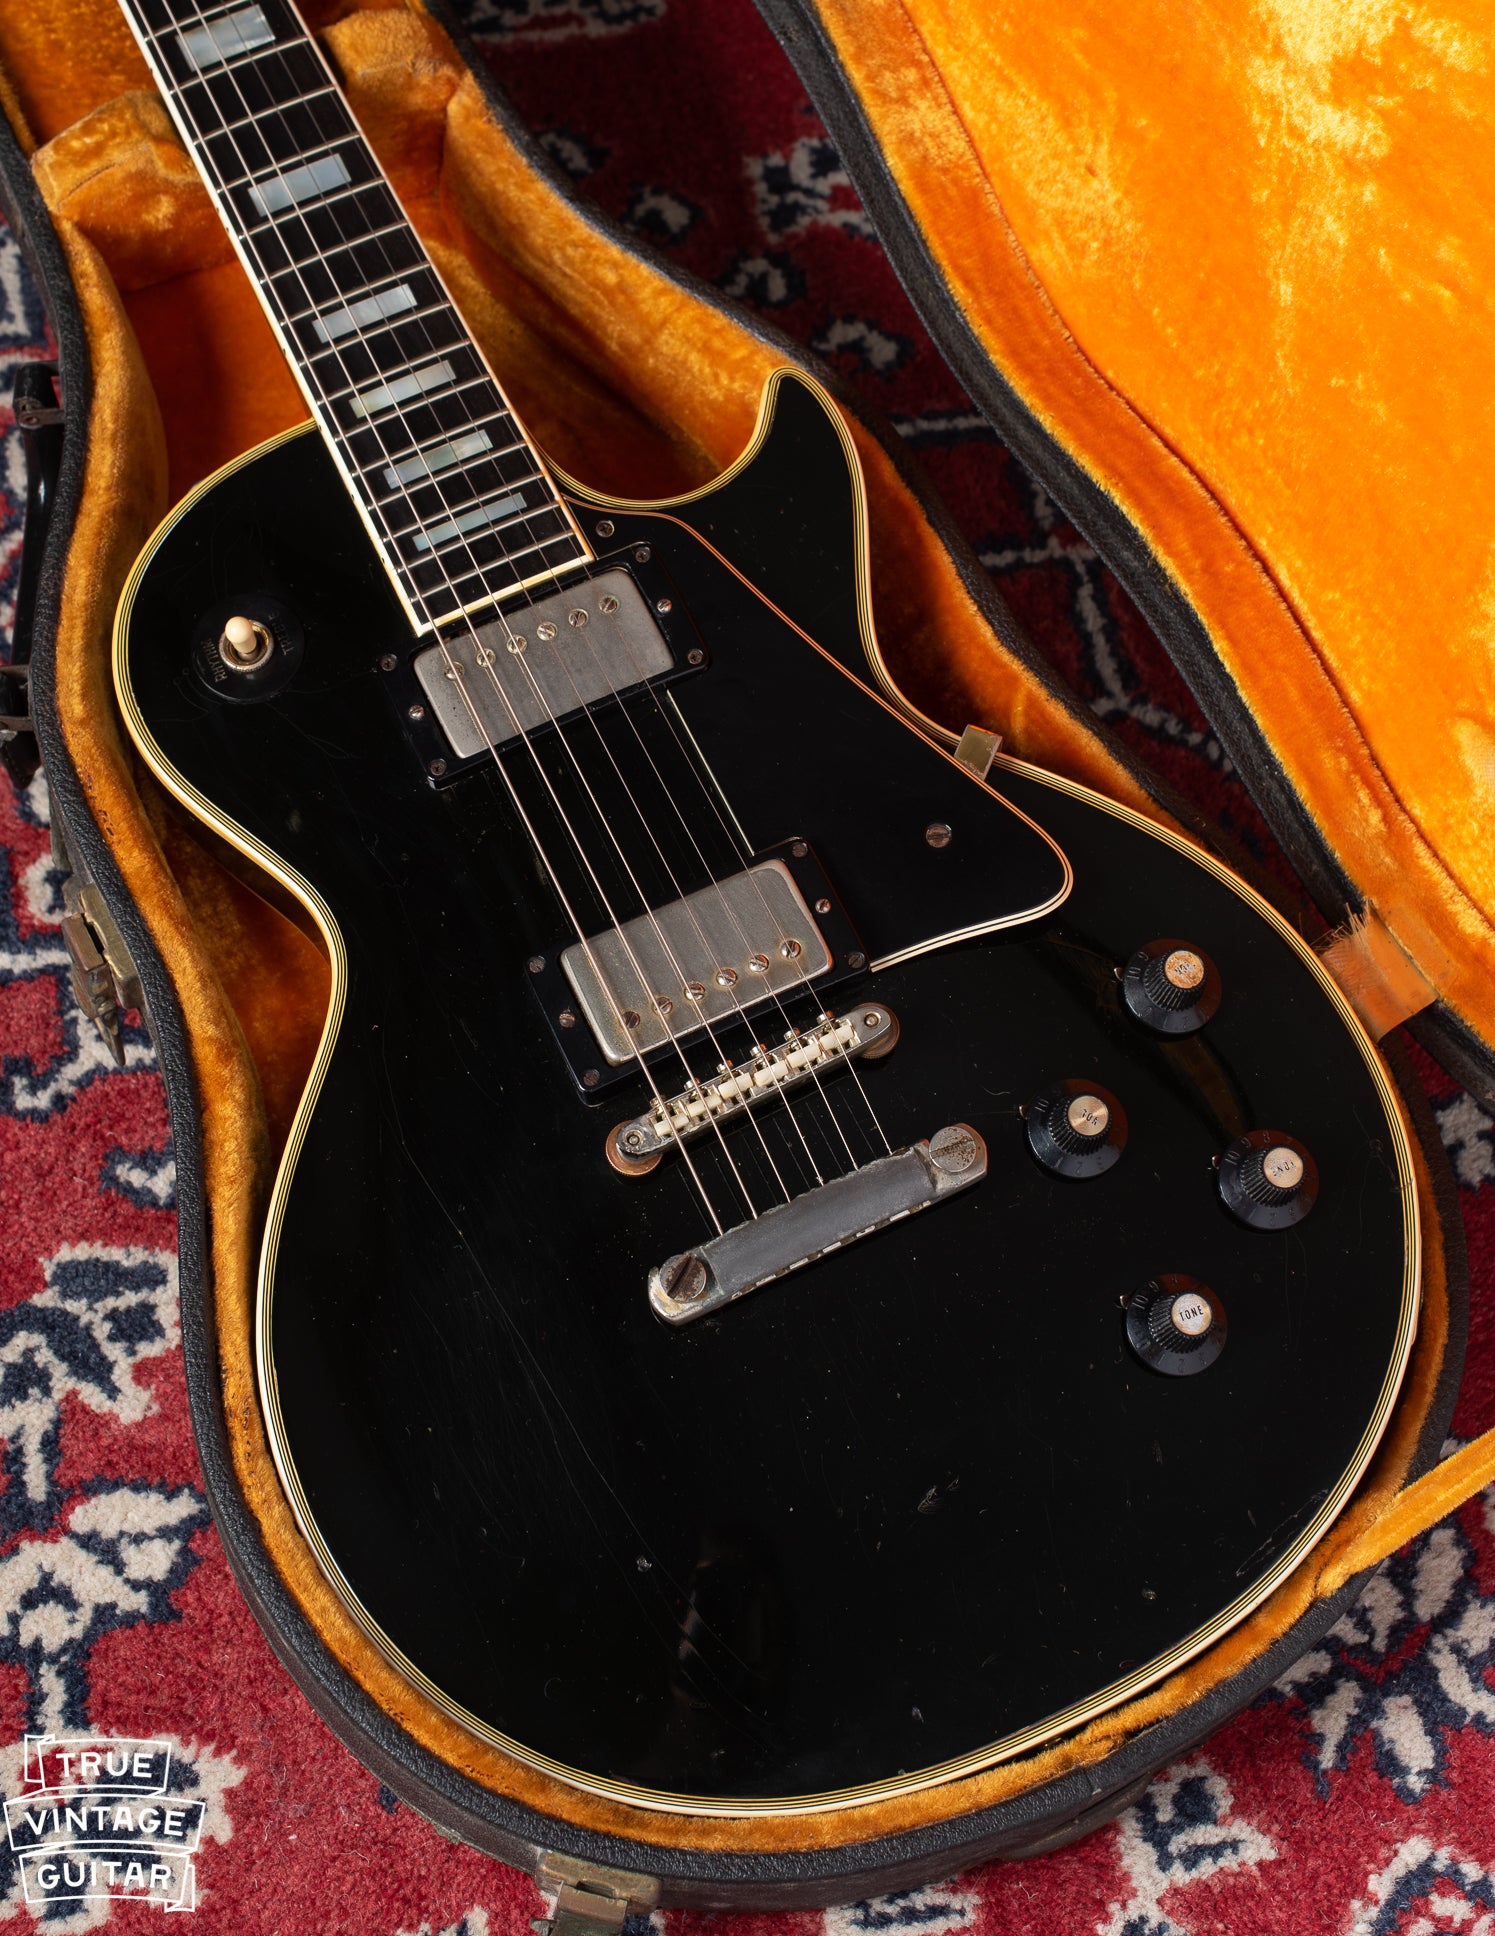 1969 Gibson Les Paul Custom black with gold parts in yellow and black case. 